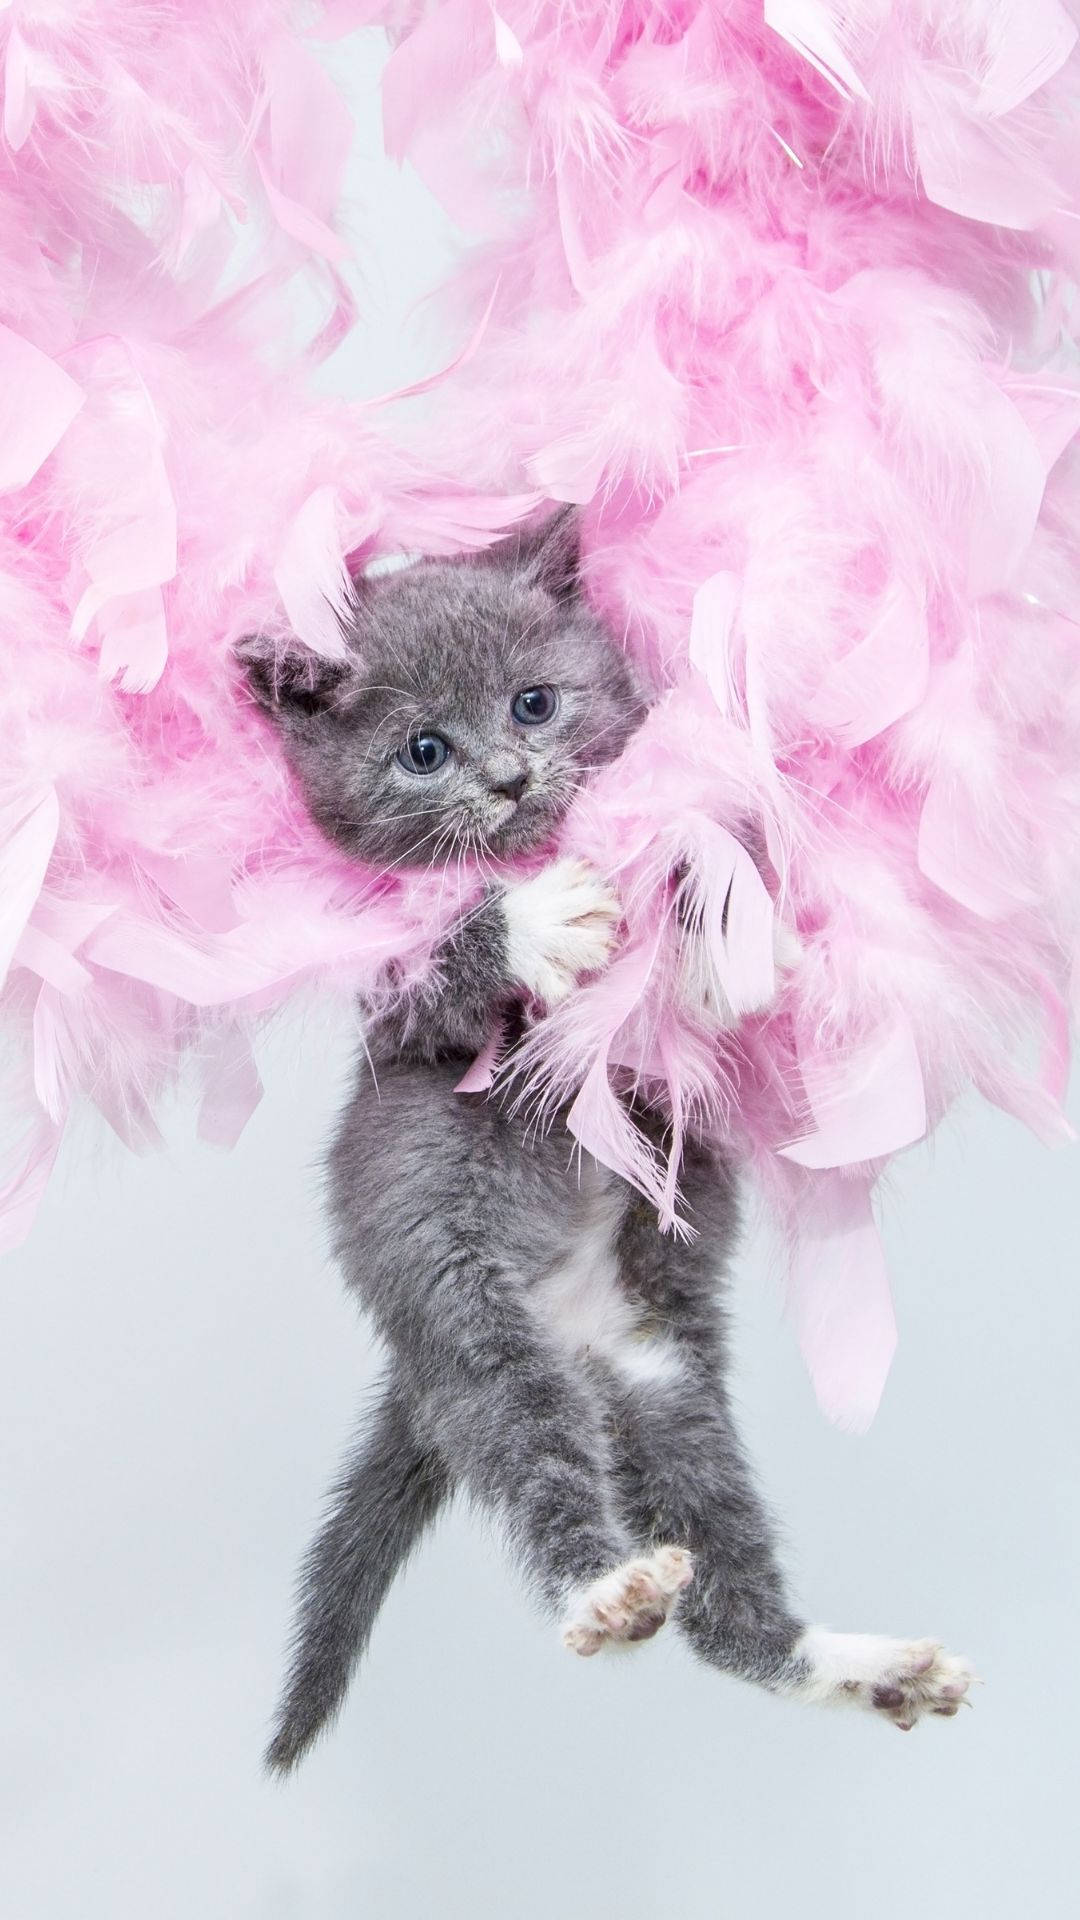 Ipod Touch Gray Kitten On Pink Feathers Background